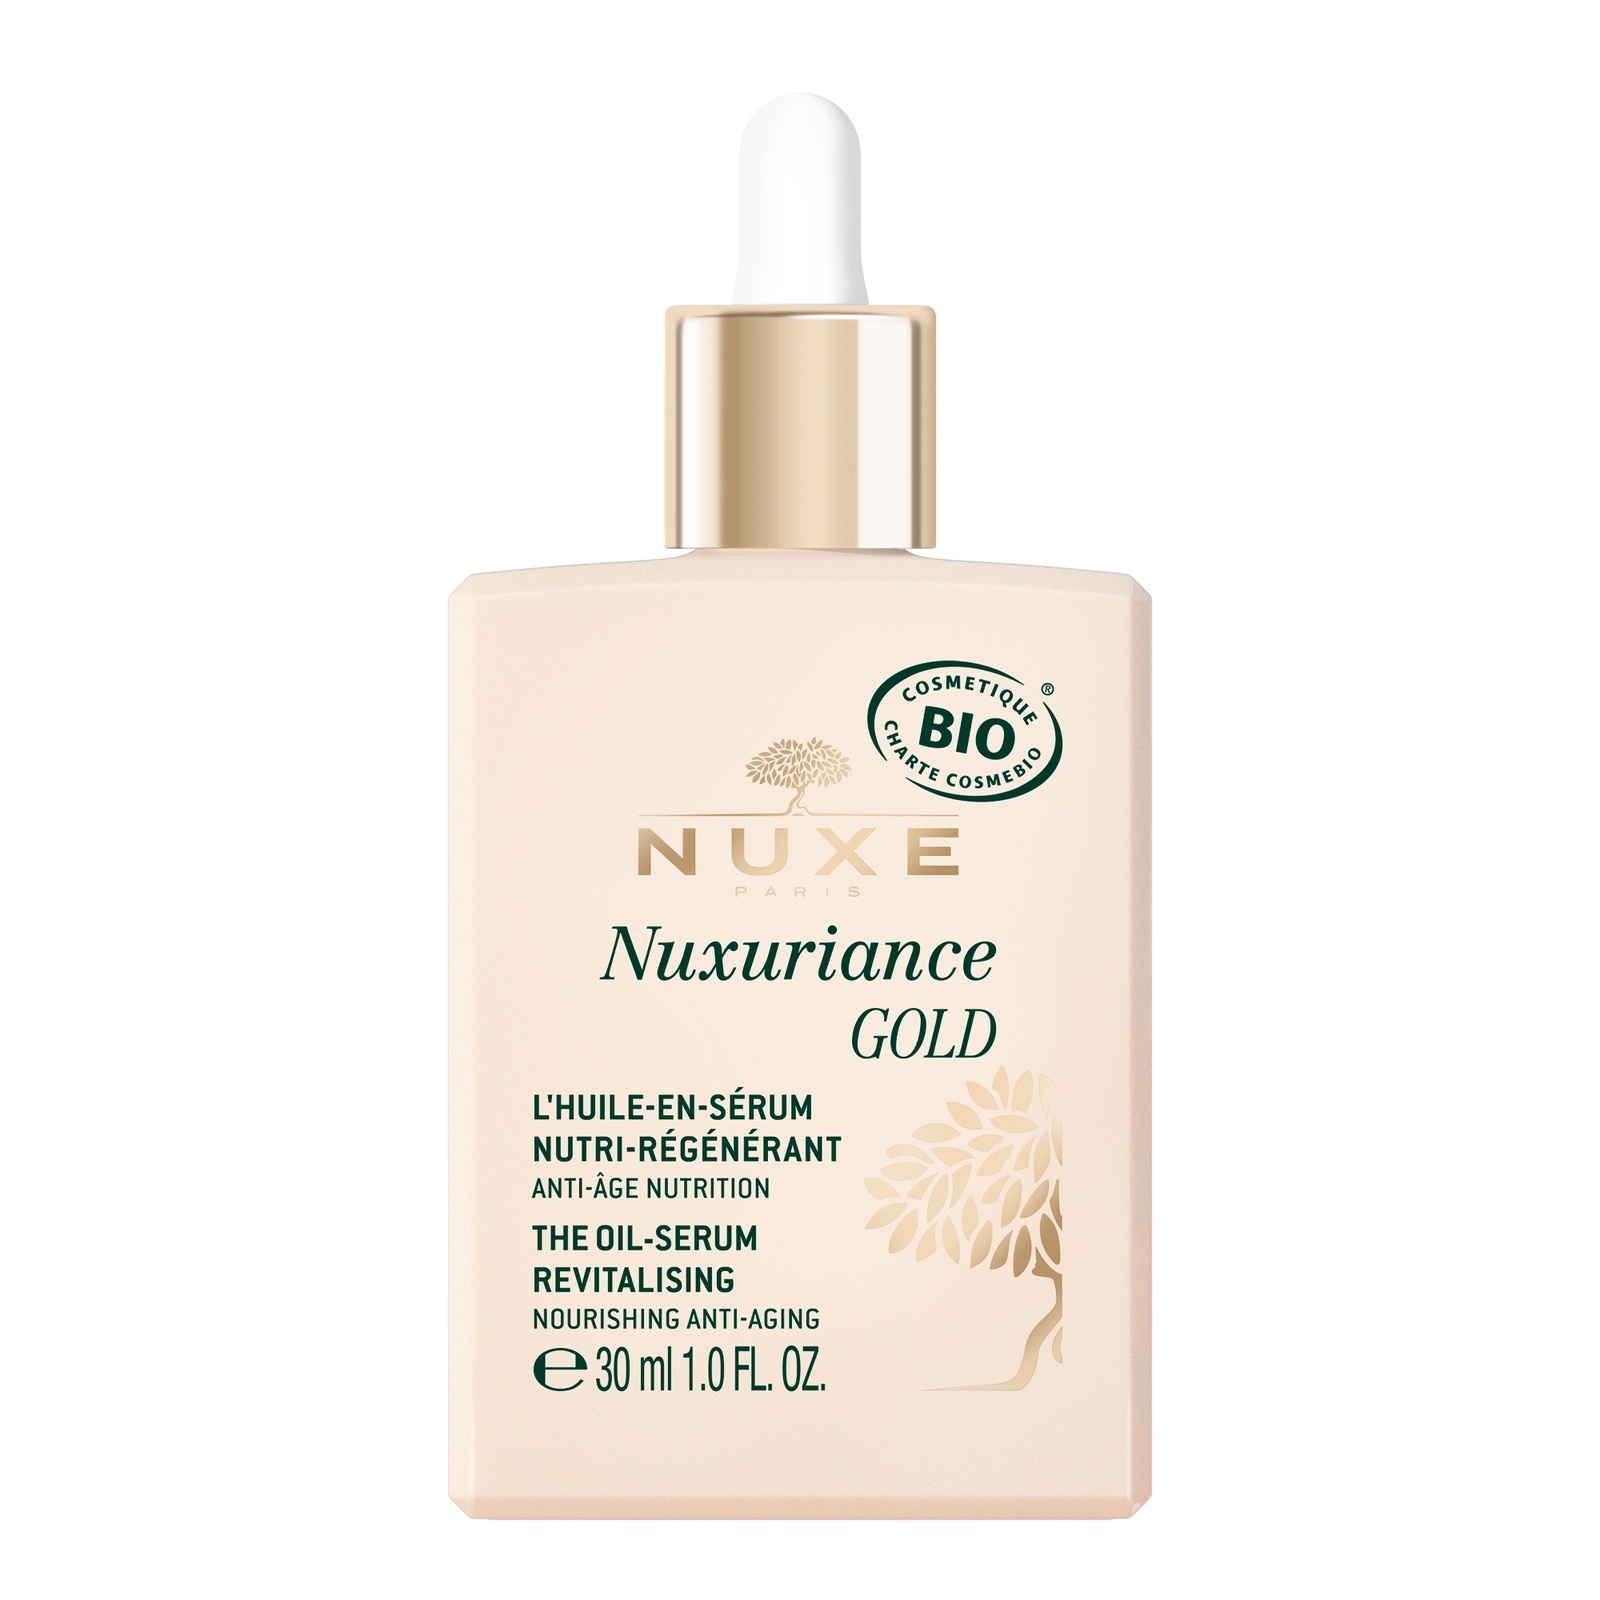 NUXE The Revitalizing Oil-Serum, Nuxuriance Gold 30ml von NUXE